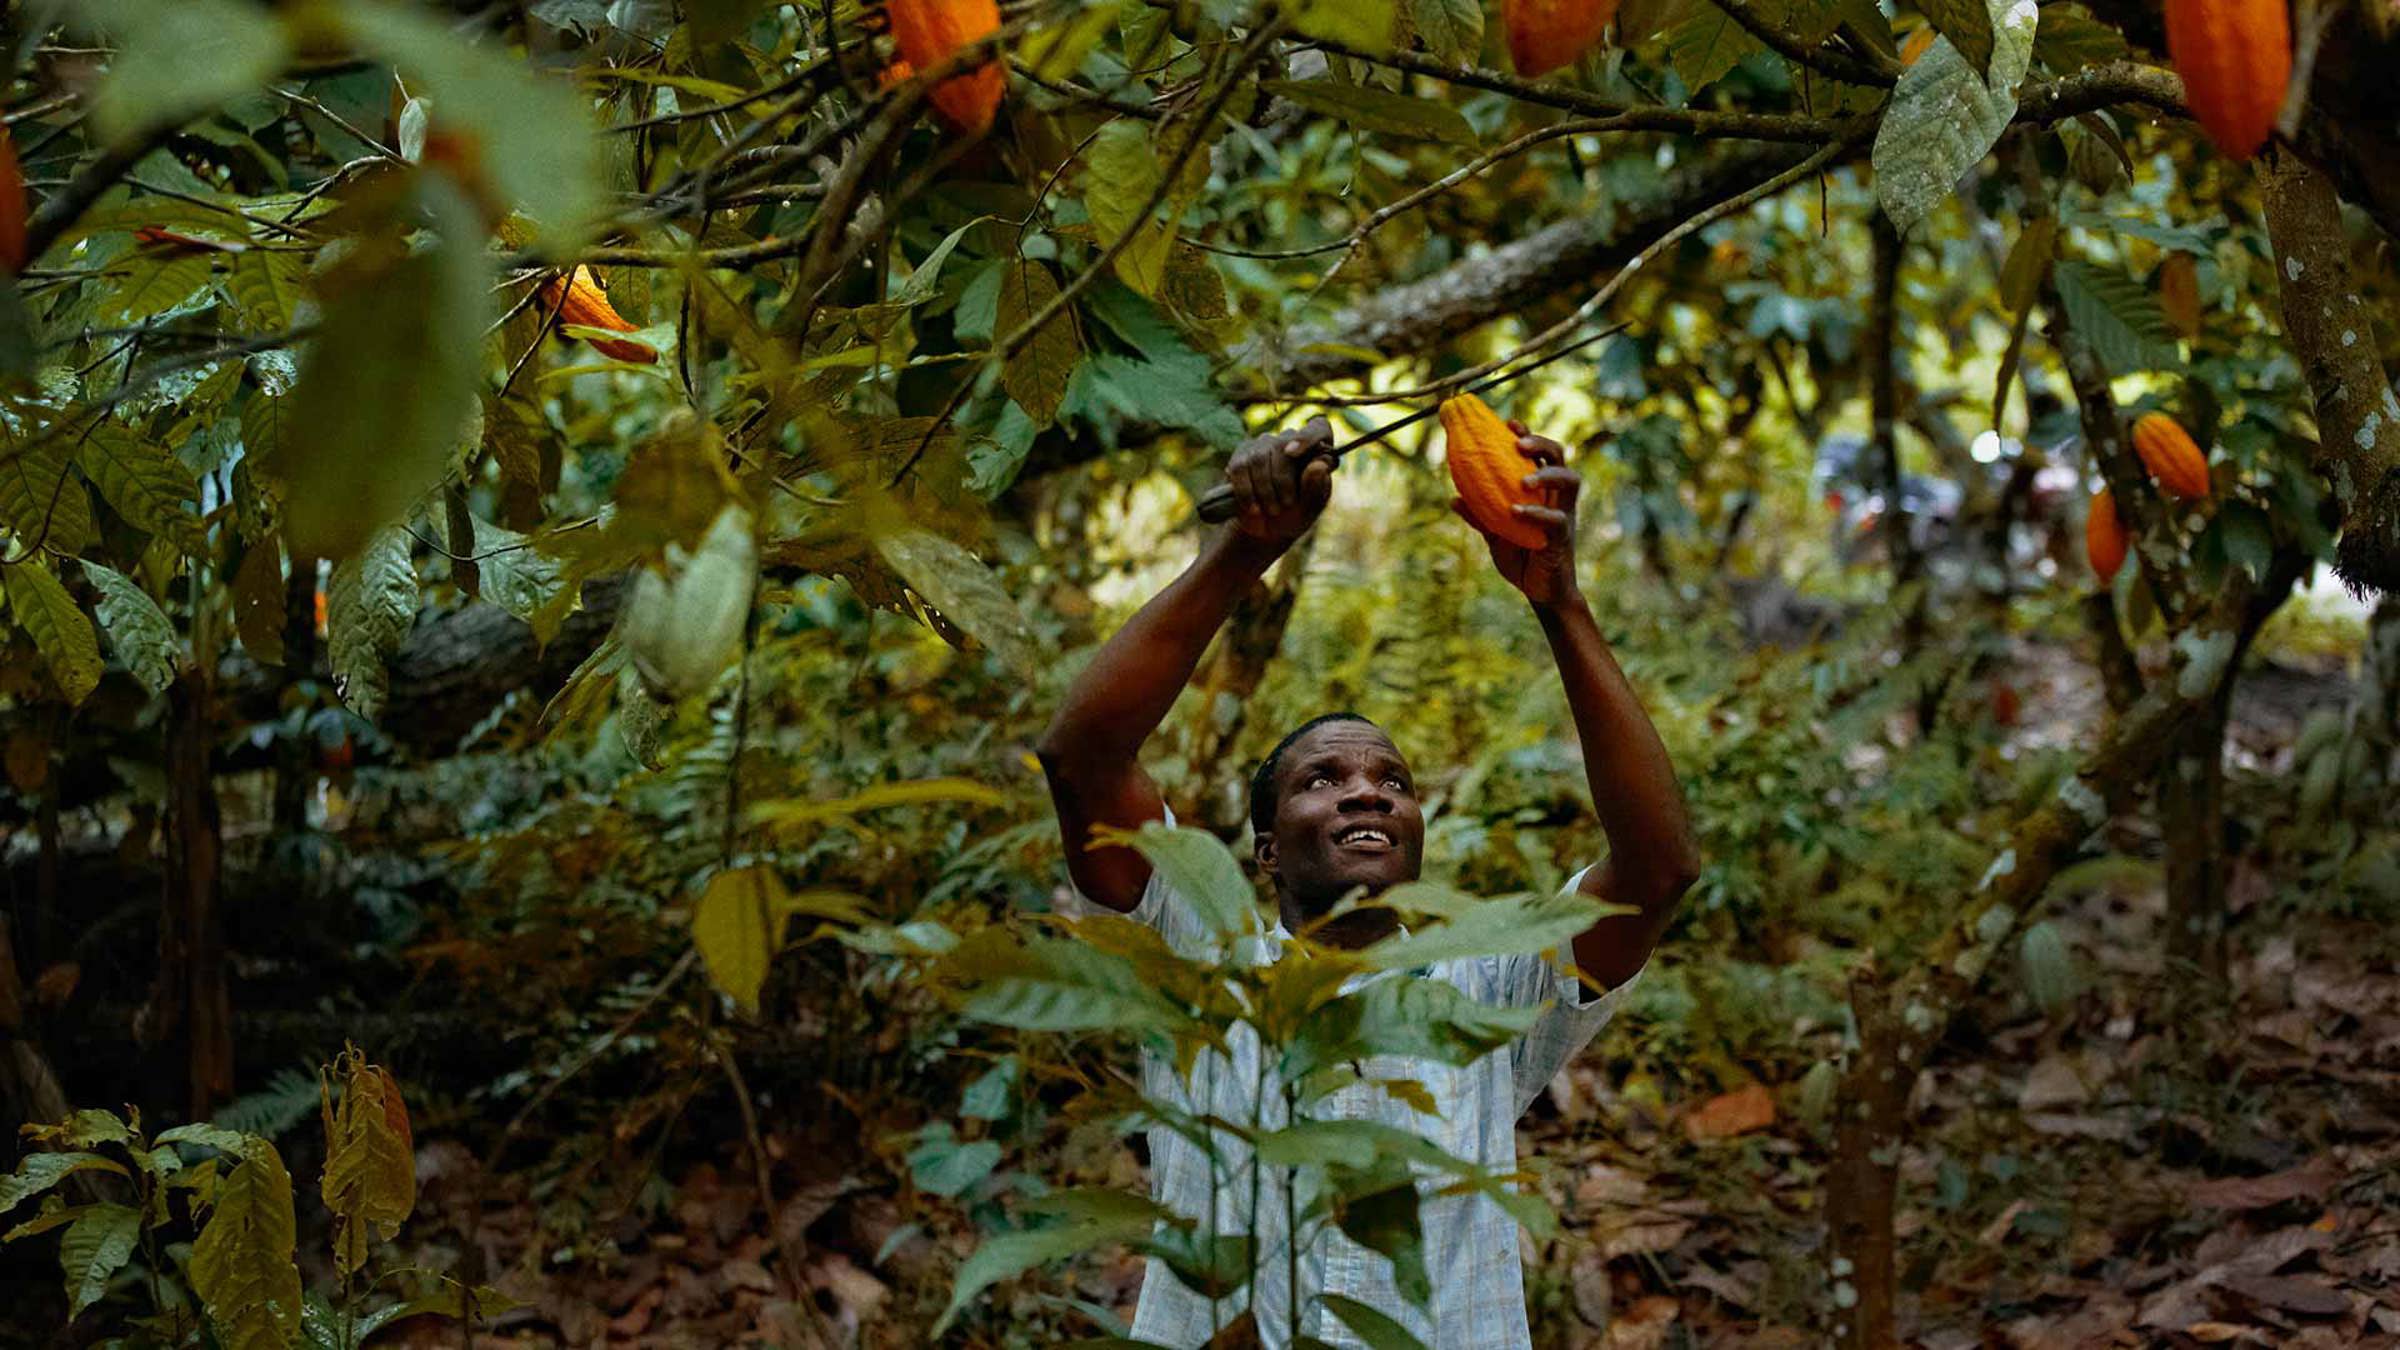 A man cutting down a cocoa pod from a tree